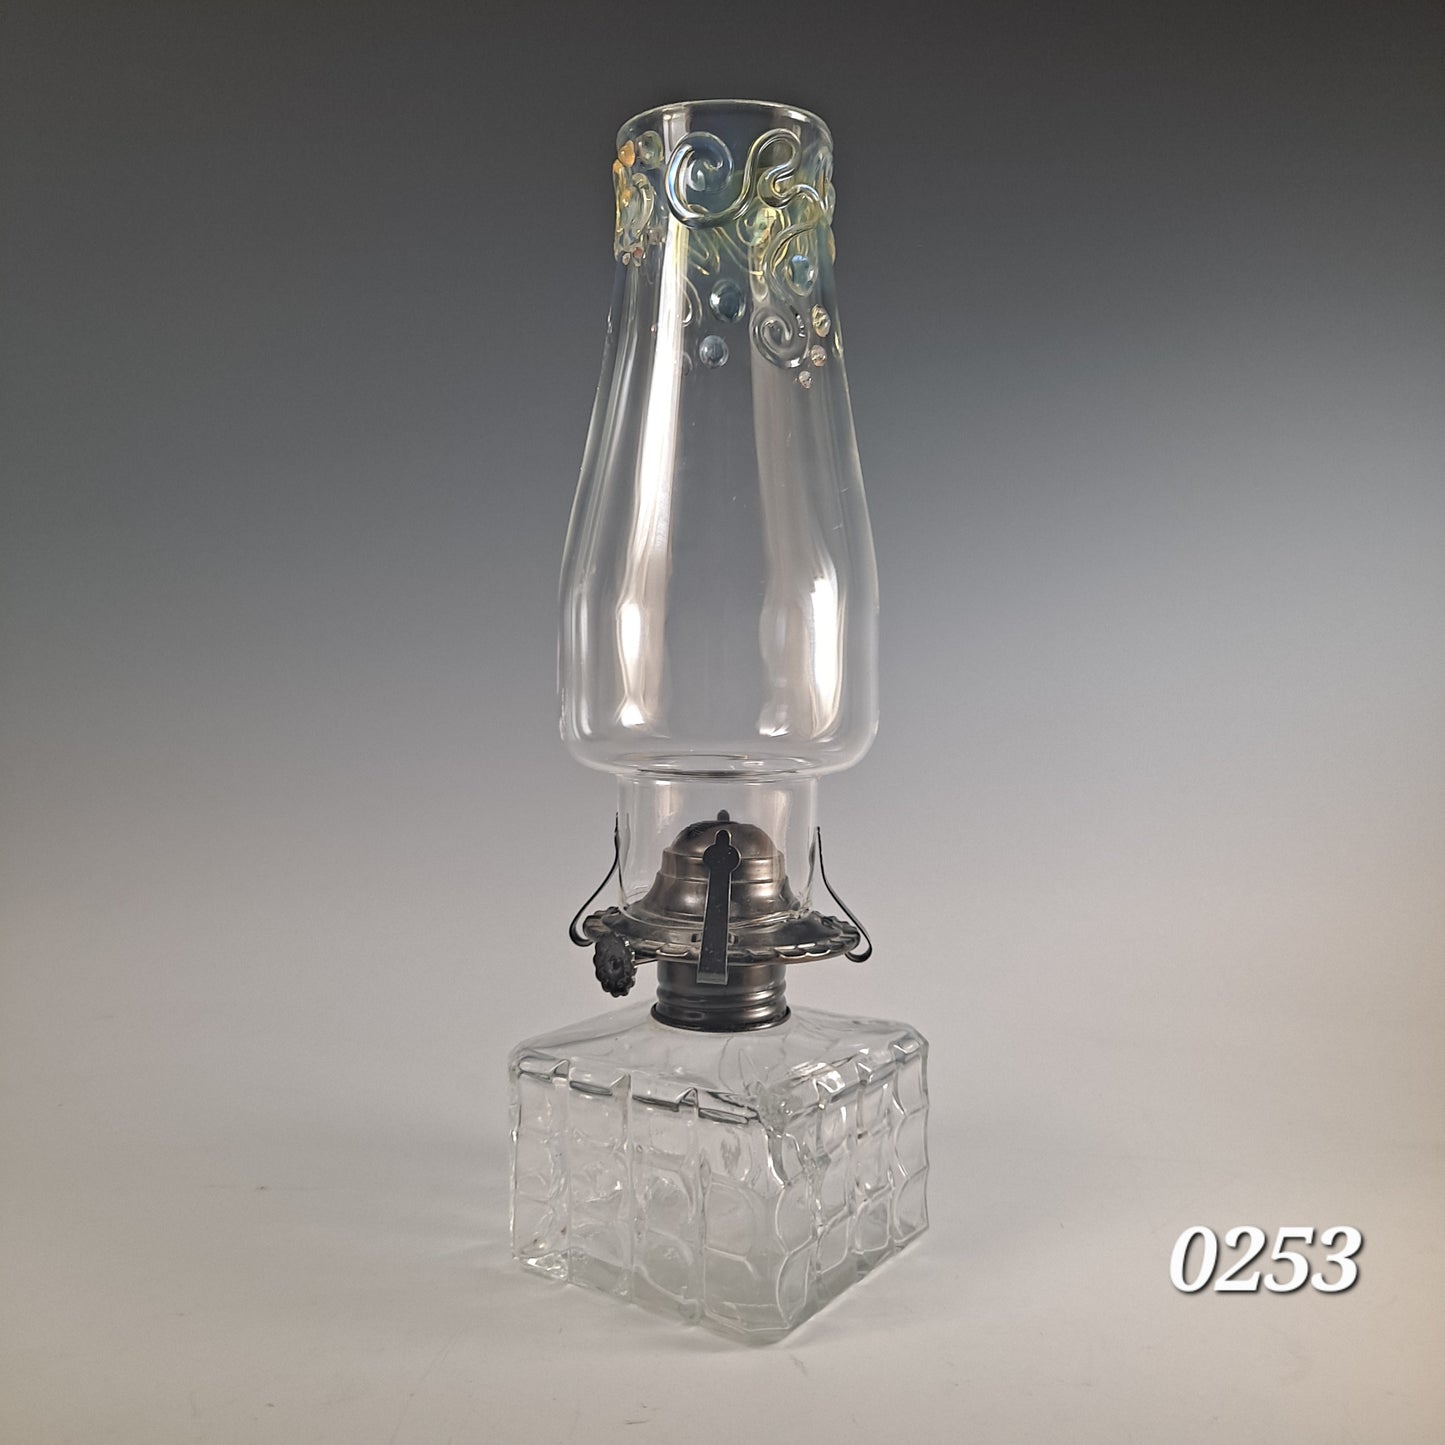 Hurricane Oil Lamp Collection